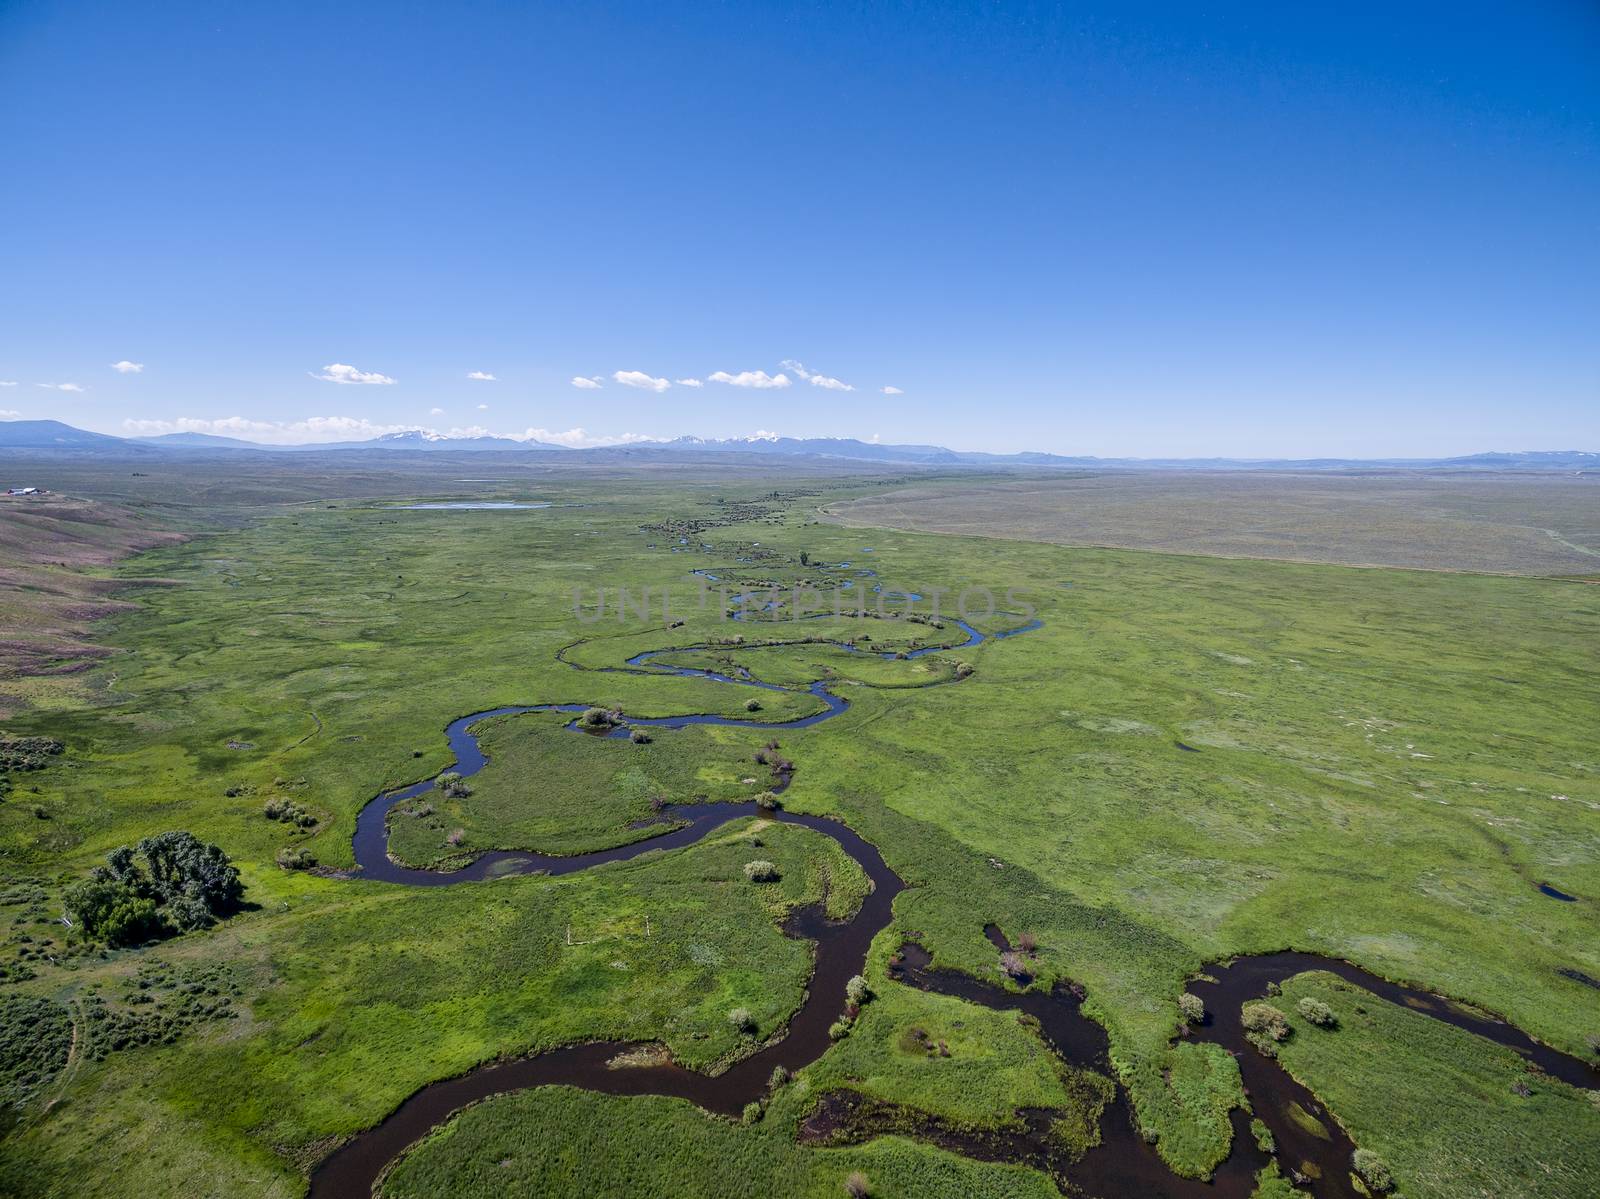 Illinois River meanders through Arapaho National Wildlife Refuge, North Park near Walden, Colorado, early summer aerial view